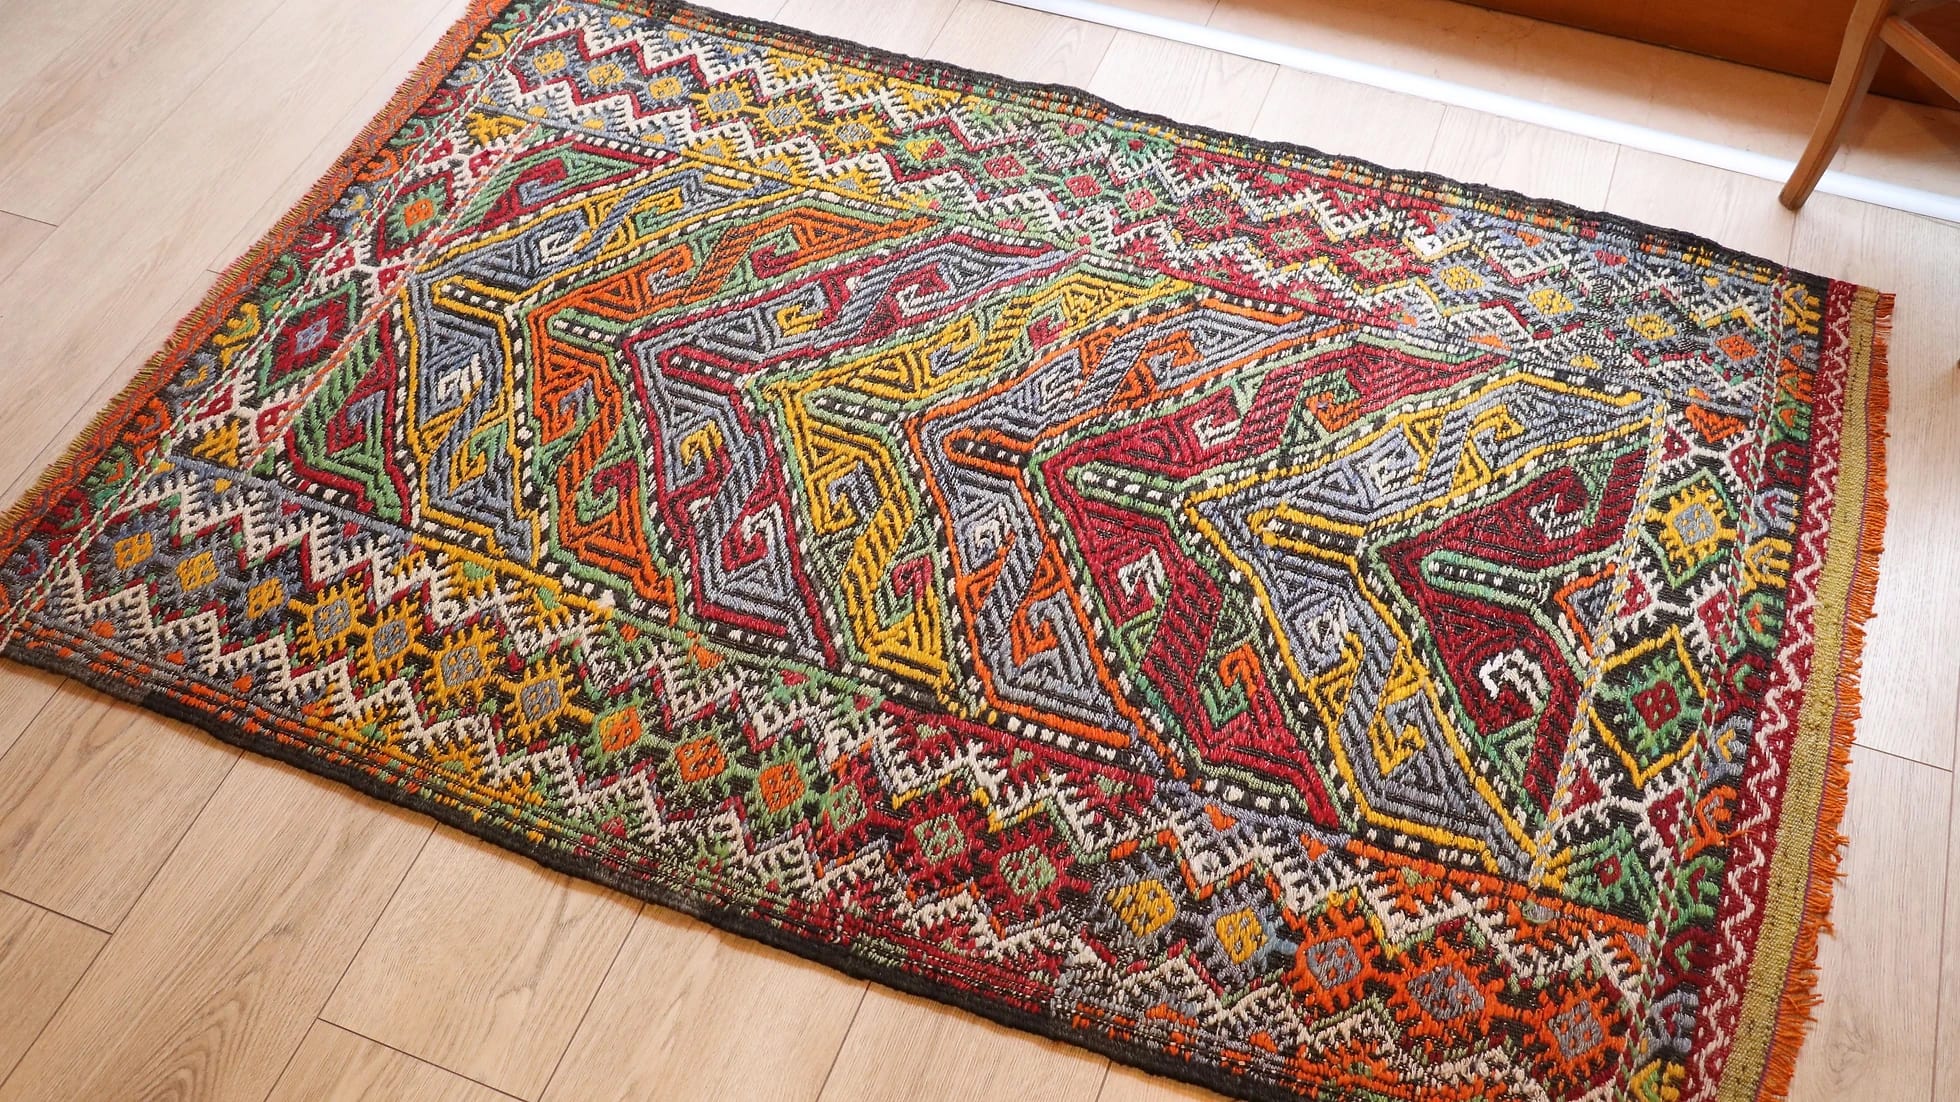 vintage mid-century Turkish rug from 1950s featuring traditional kilim motifs in many vivid and vibrant colors